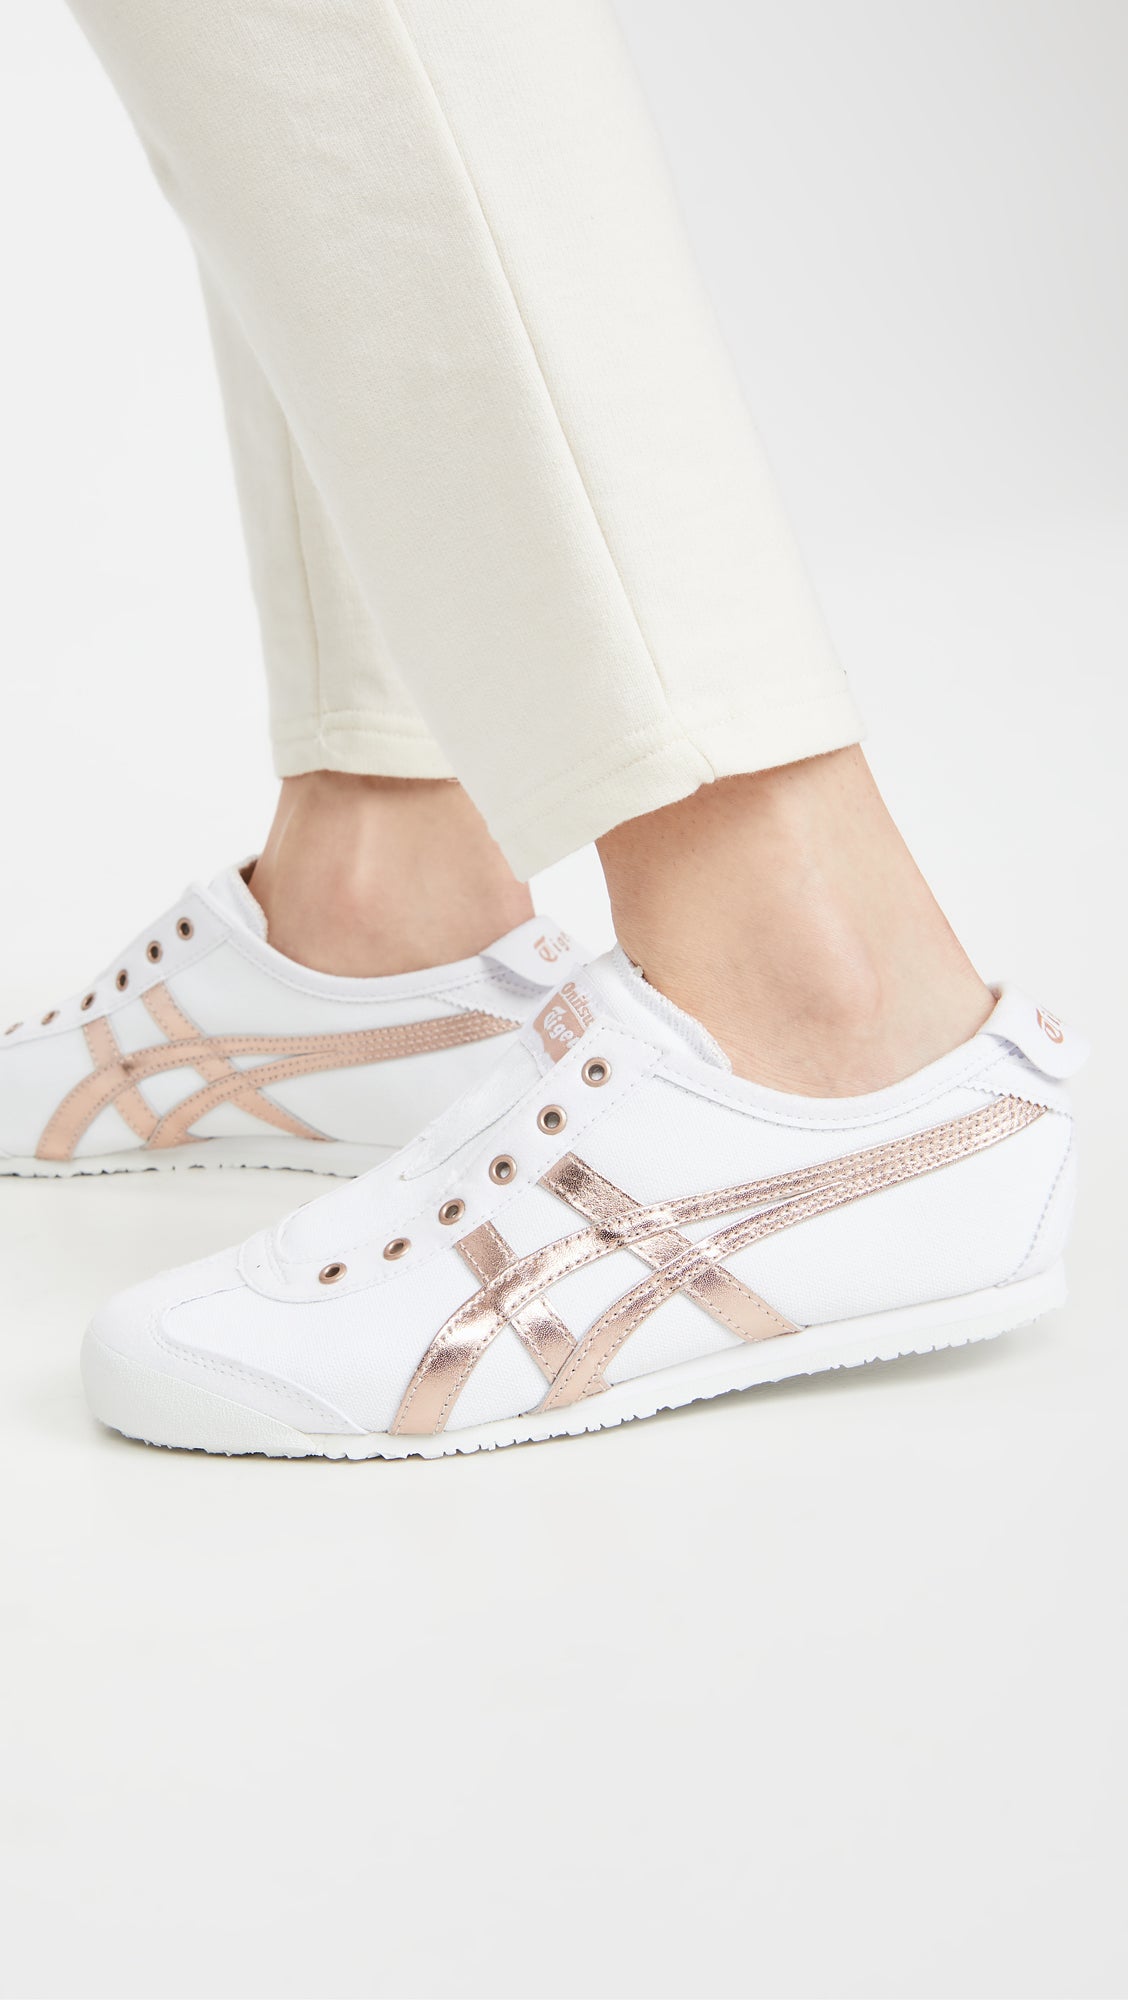 First Copy Onitsuka Tiger Mexico 66 Slip On Sneakers (White/Rose Gold)